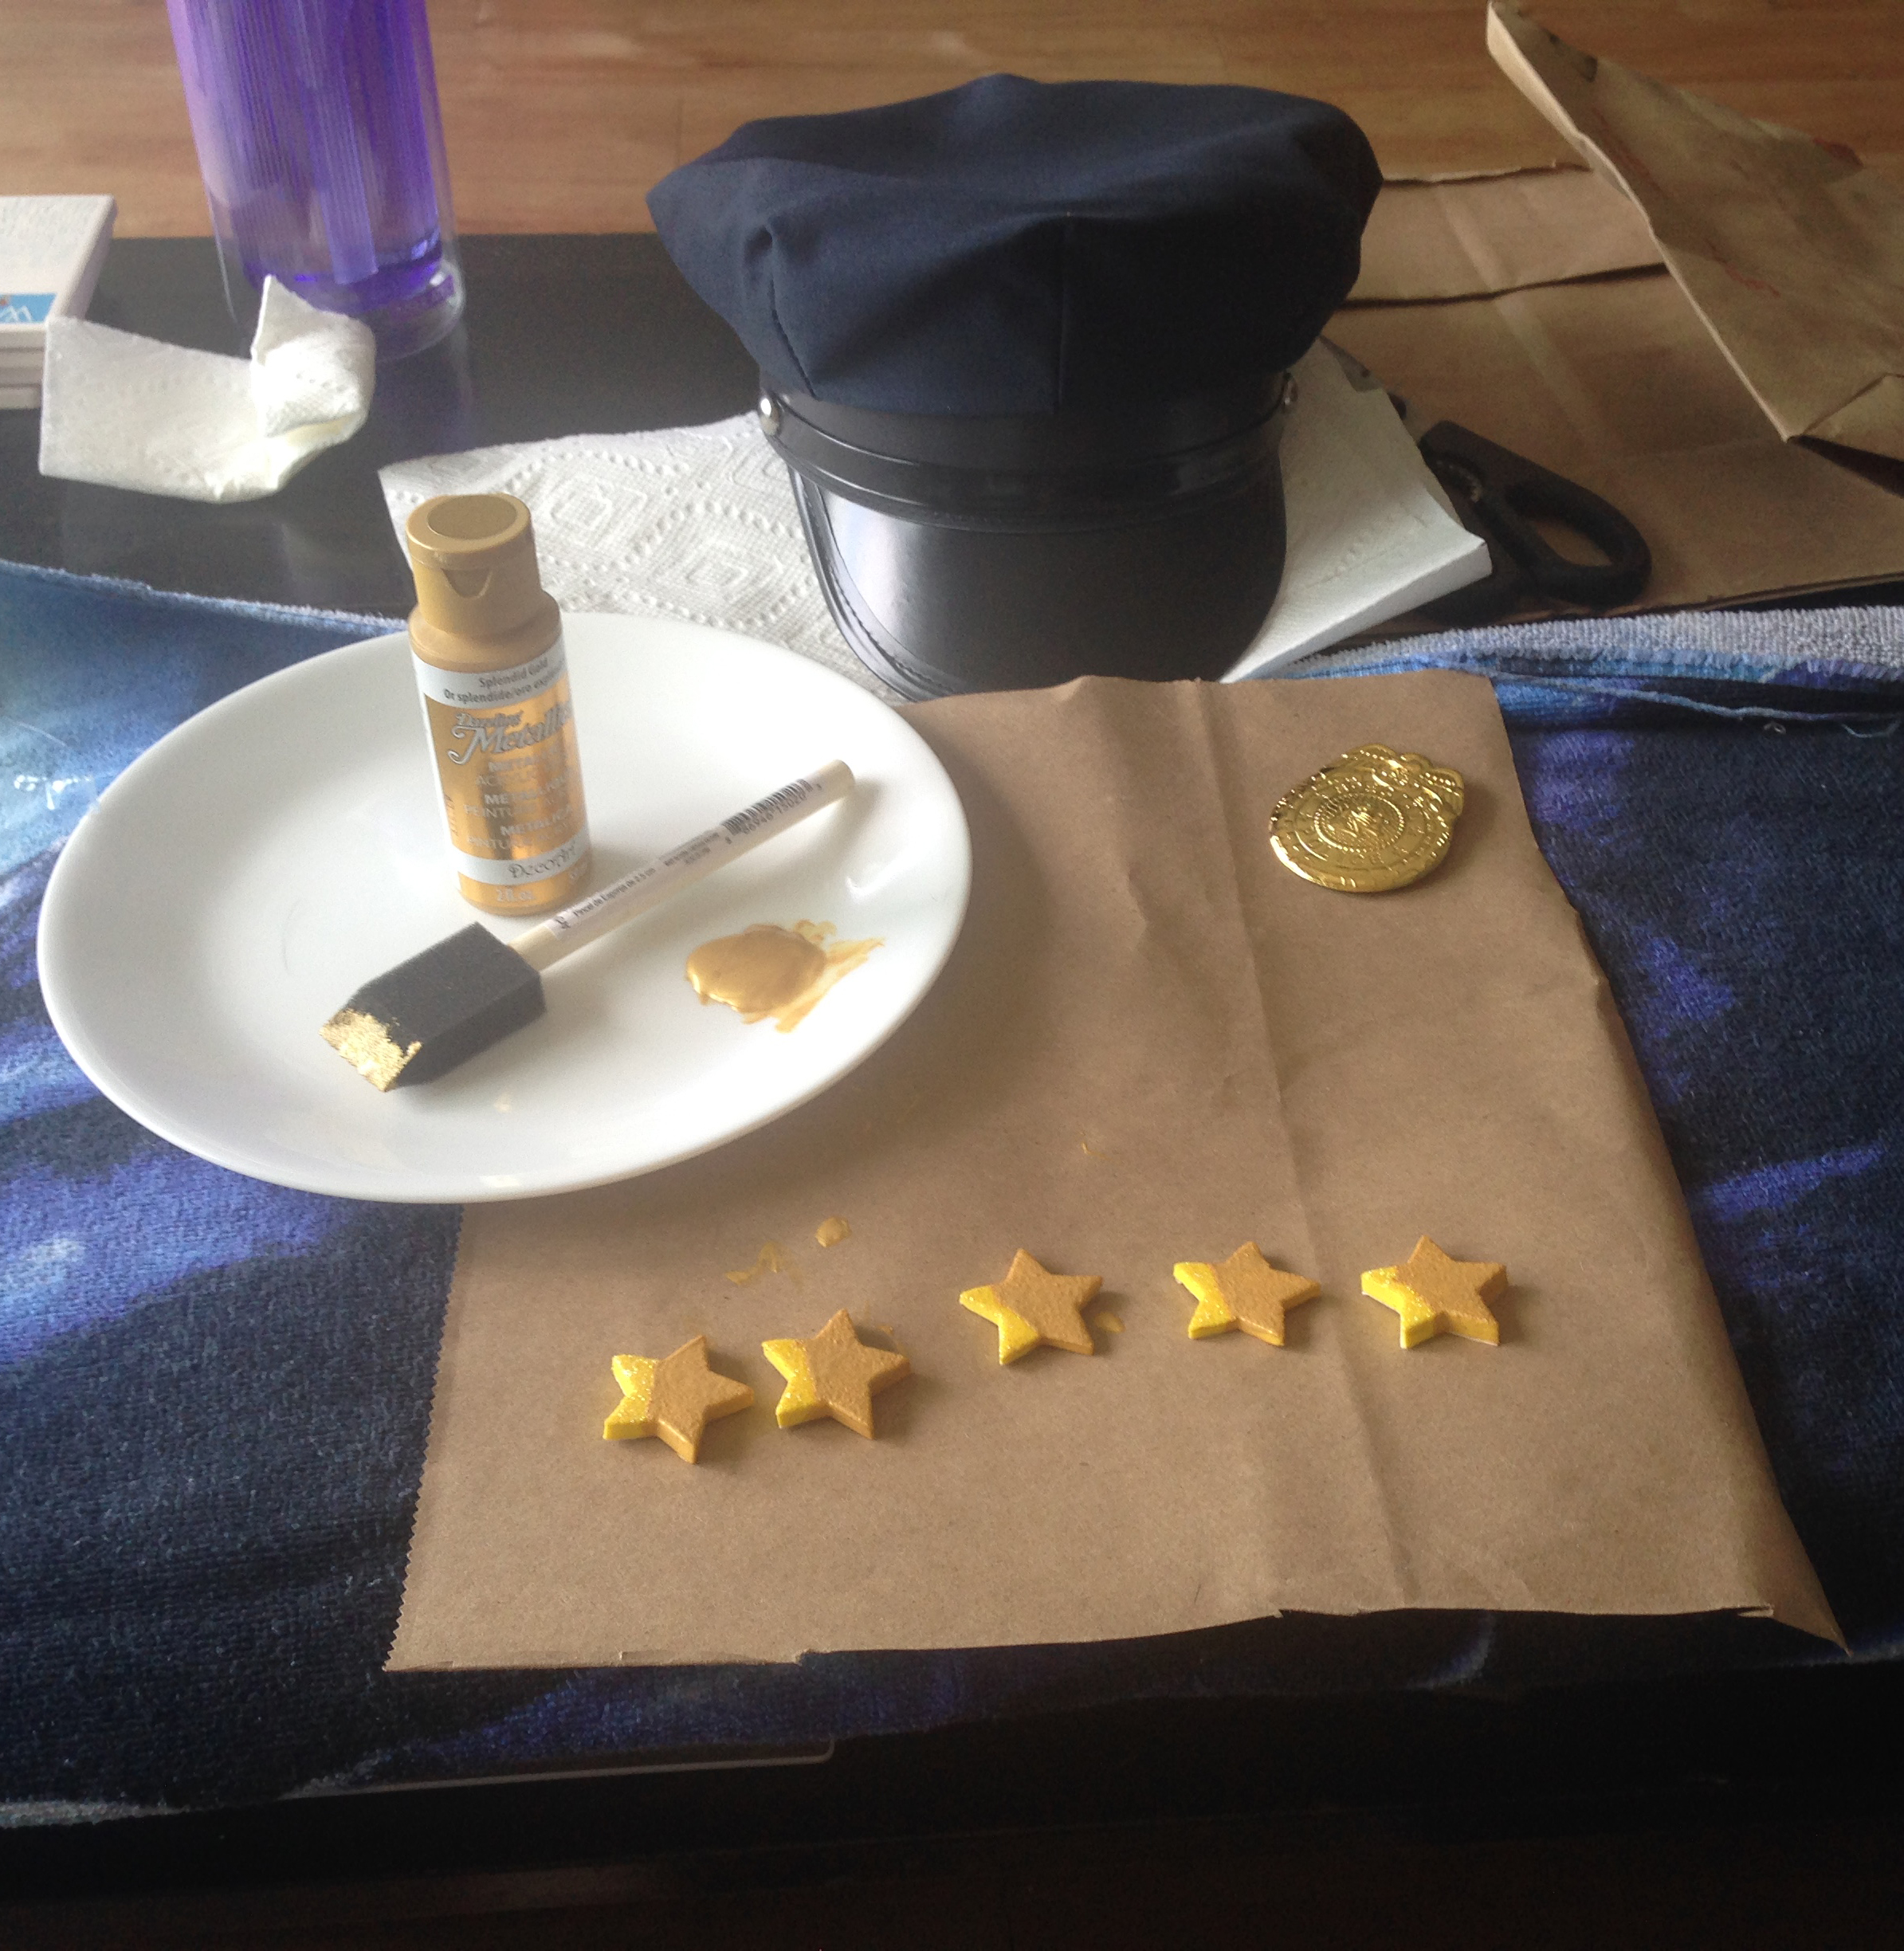 How to Make Axe Cop's Police Hat: Painting Gold Stars